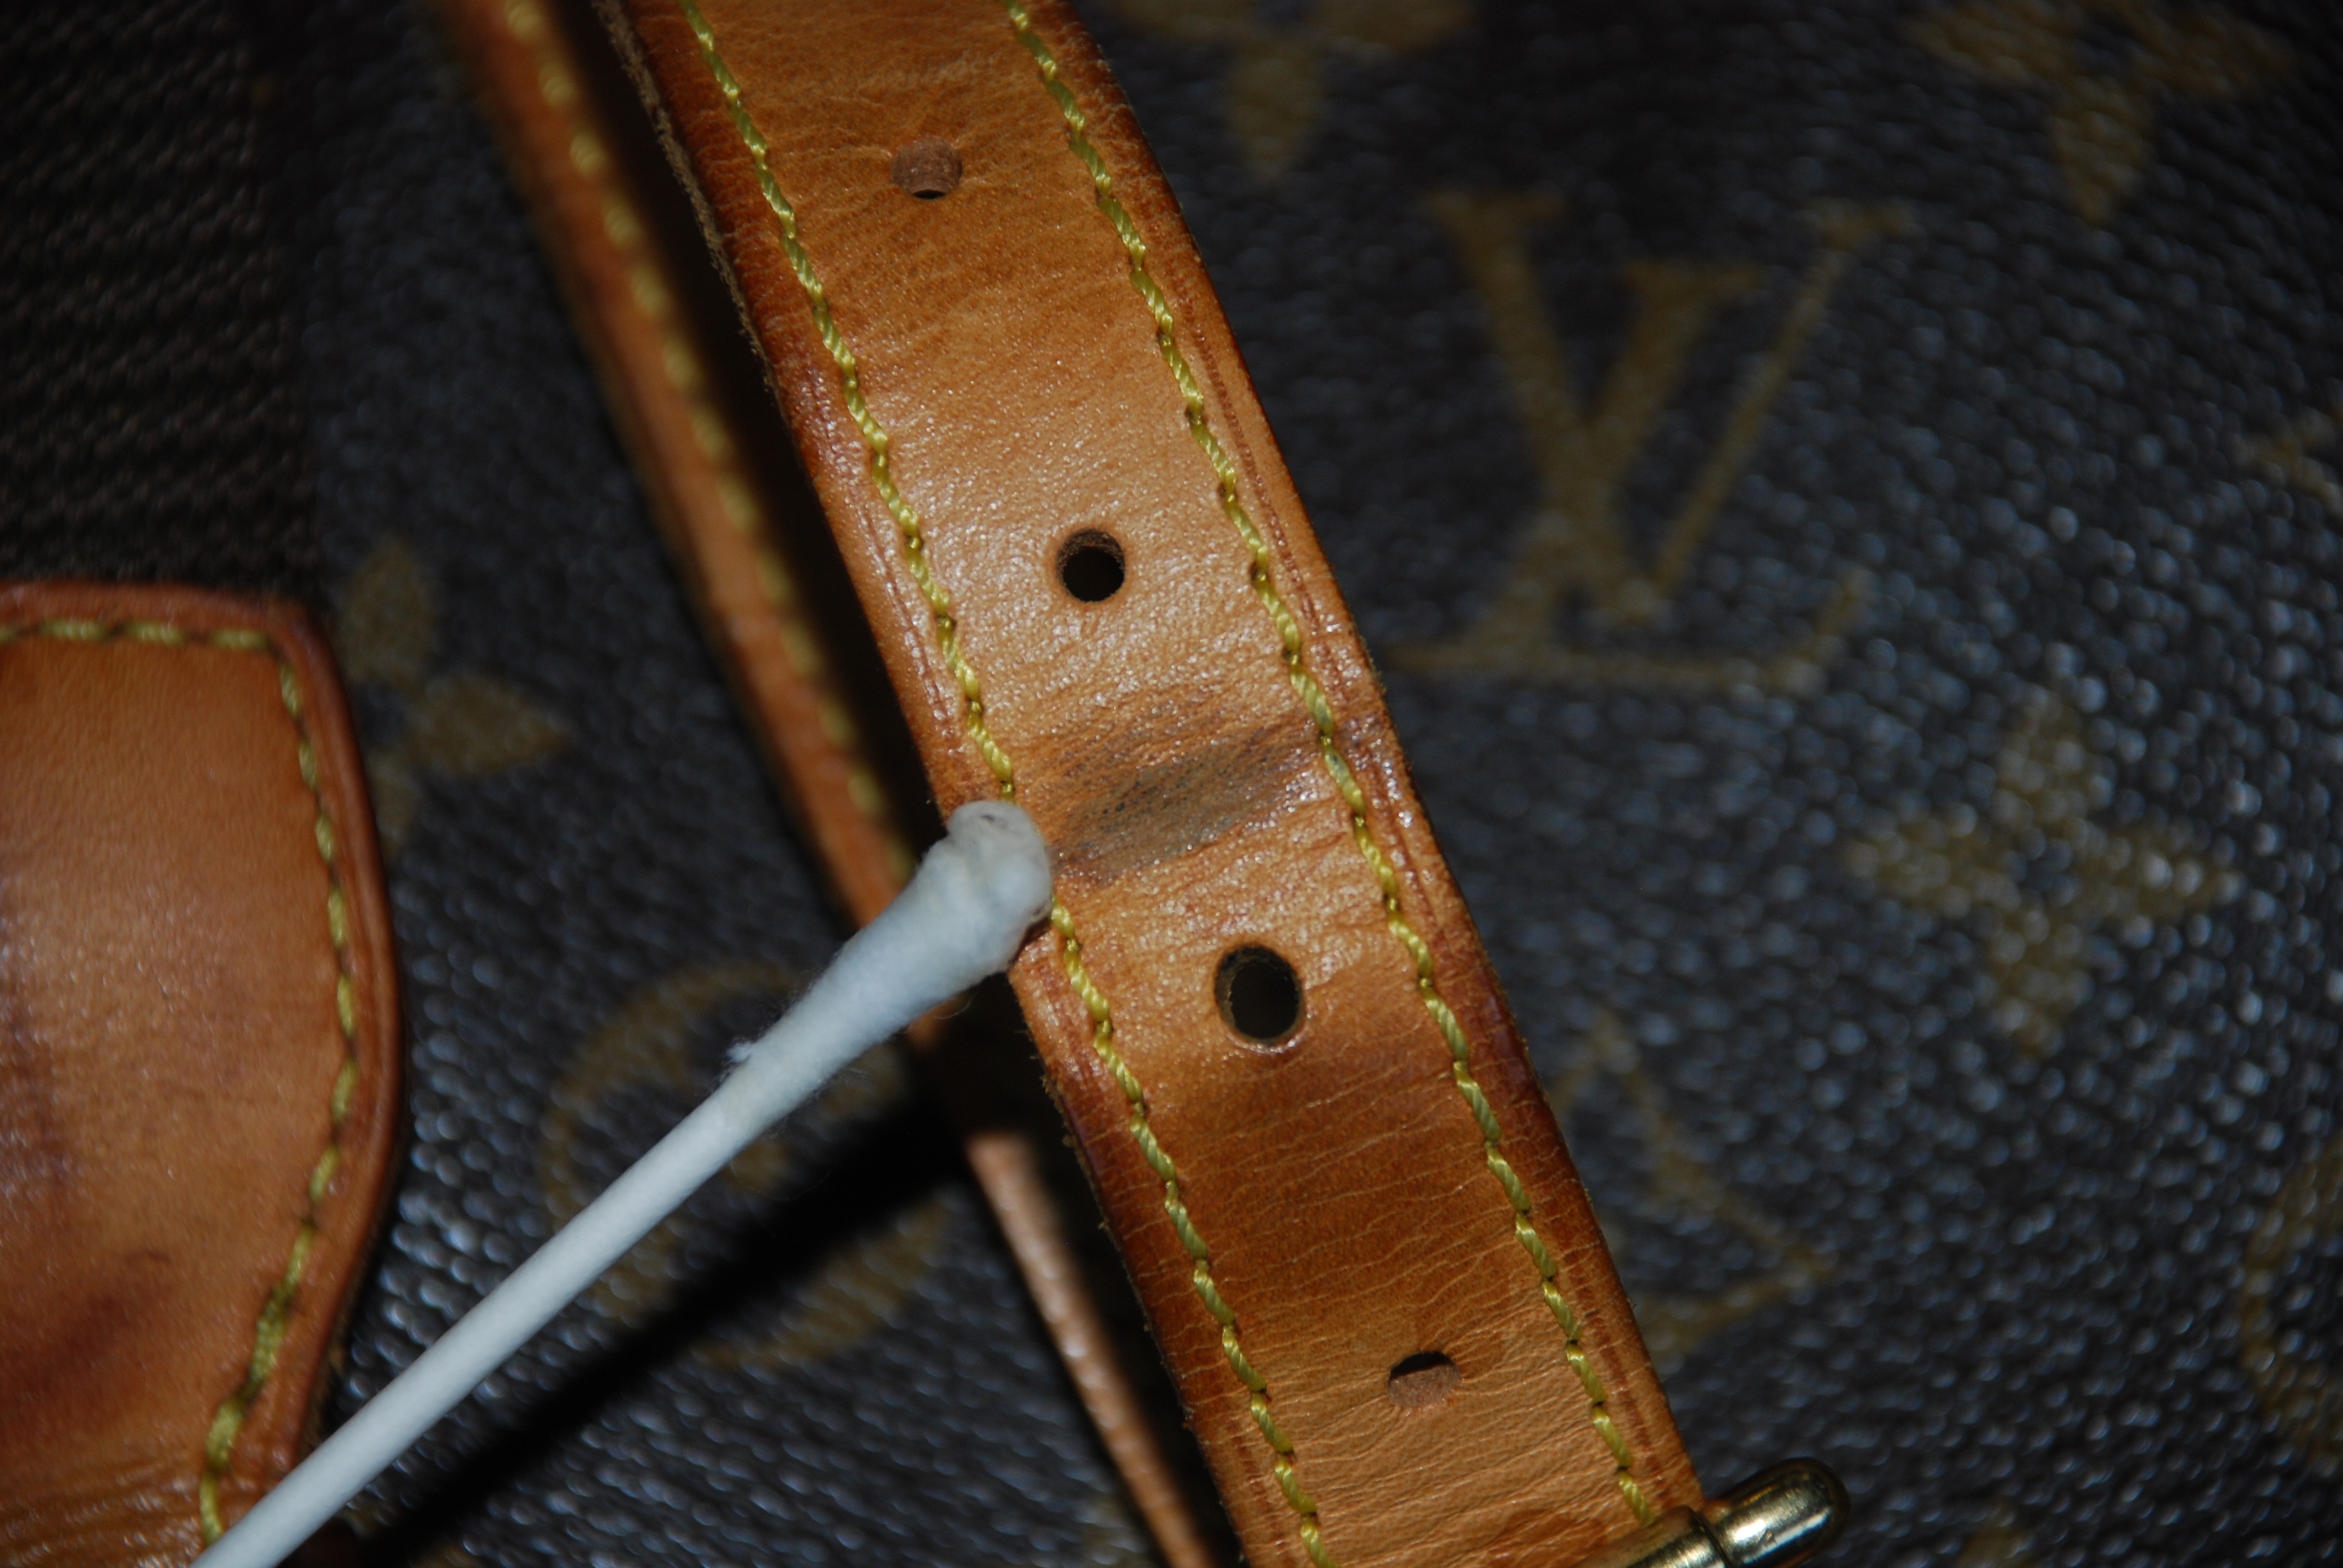 Does anyone know what these black marks are on the Vachetta leather and how  do I remove them? : r/Louisvuitton